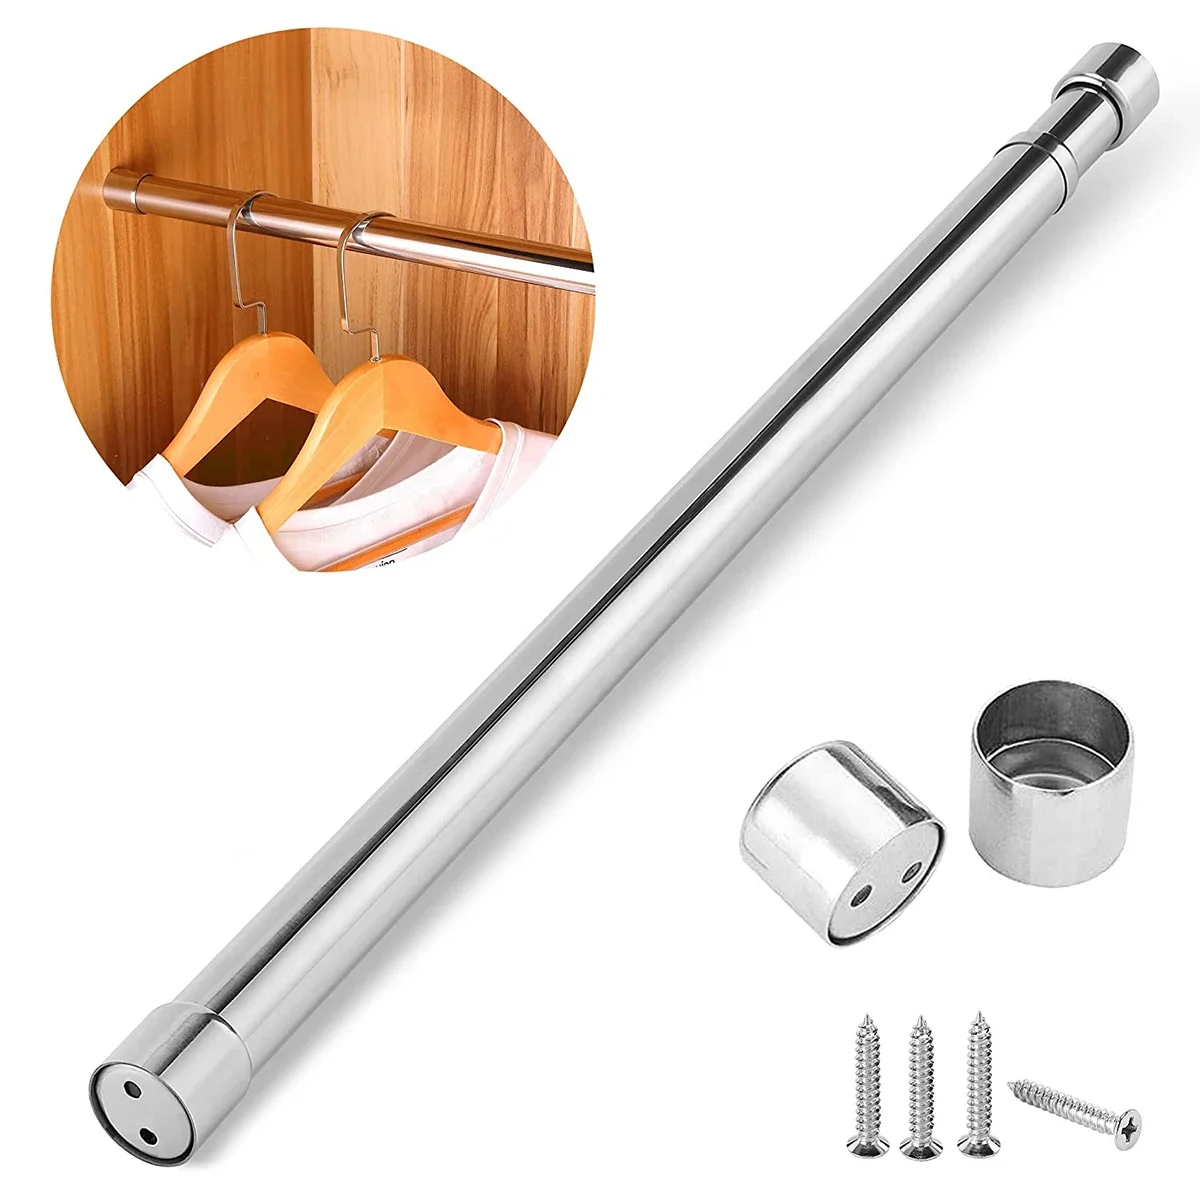 

Wardrobe Rail Extendable Clothing Rail 21.5 to 39.5 Inch Stainless Steel Clothes Rod with End Sockets Screws Adjustable Closet